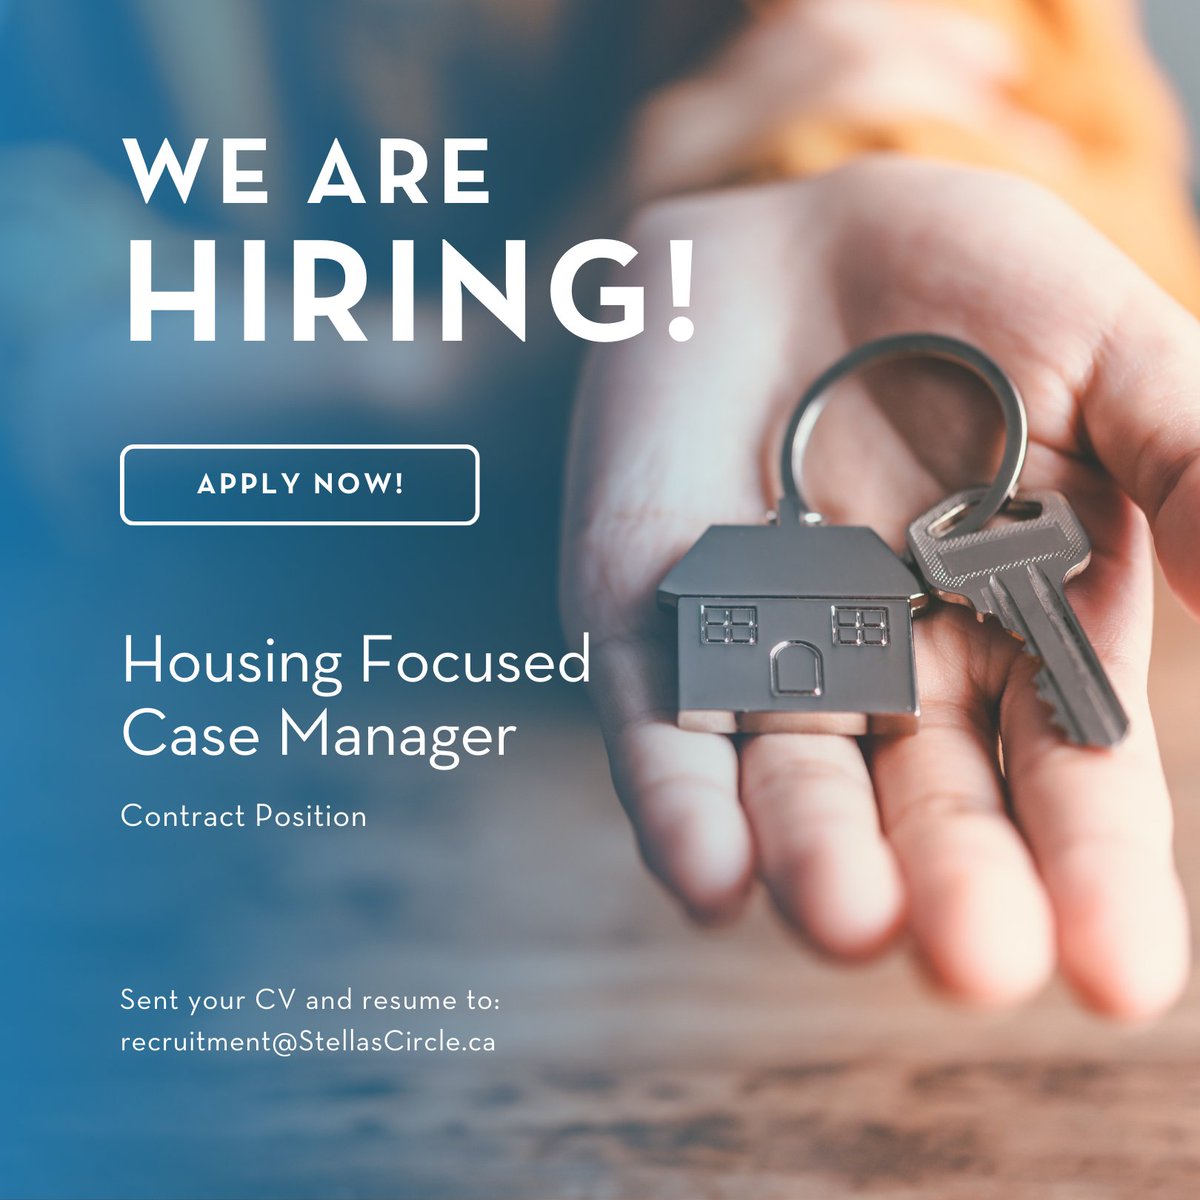 We're seeking a Housing Focused Case Manager who's passionate about making a difference This position plays a pivotal role in supporting participants by helping them navigate the transition from homelessness to long-term stable housing Learn more & apply:stellascircle.ca/learn-more/car…